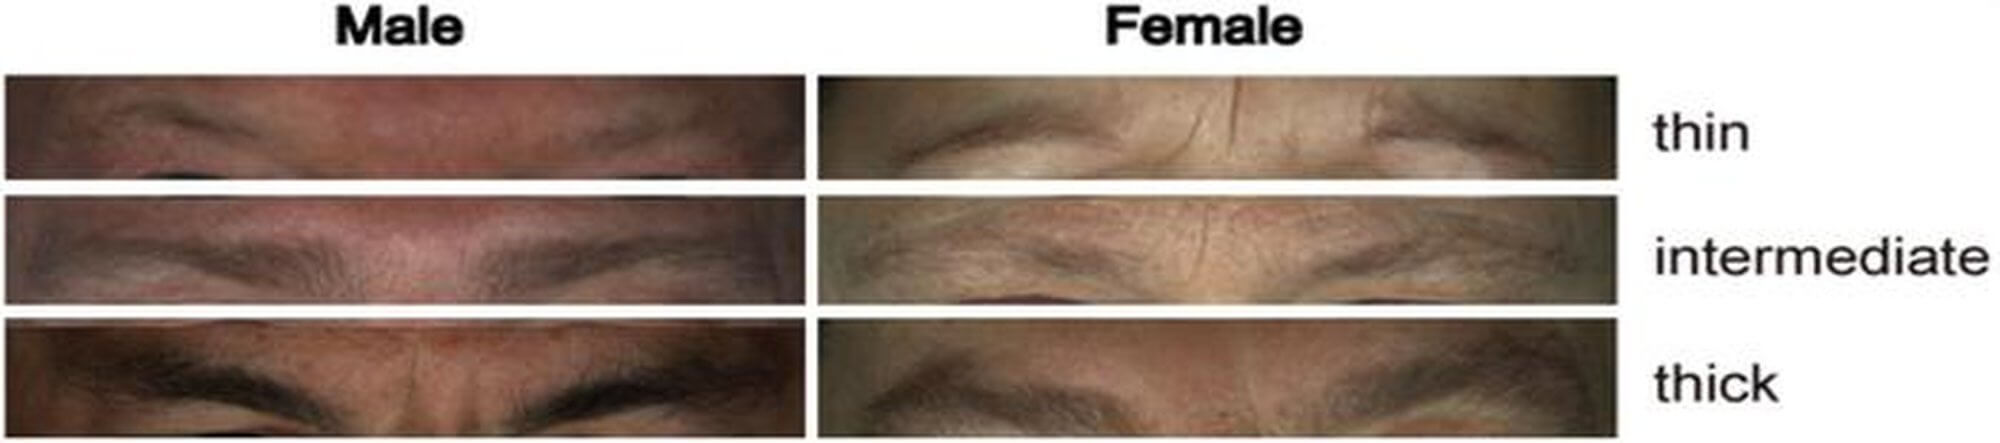 Example images illustrating eyebrow thickness classified into three categories, i.e., 0-thin, 1-intermediate, and 2-thick.